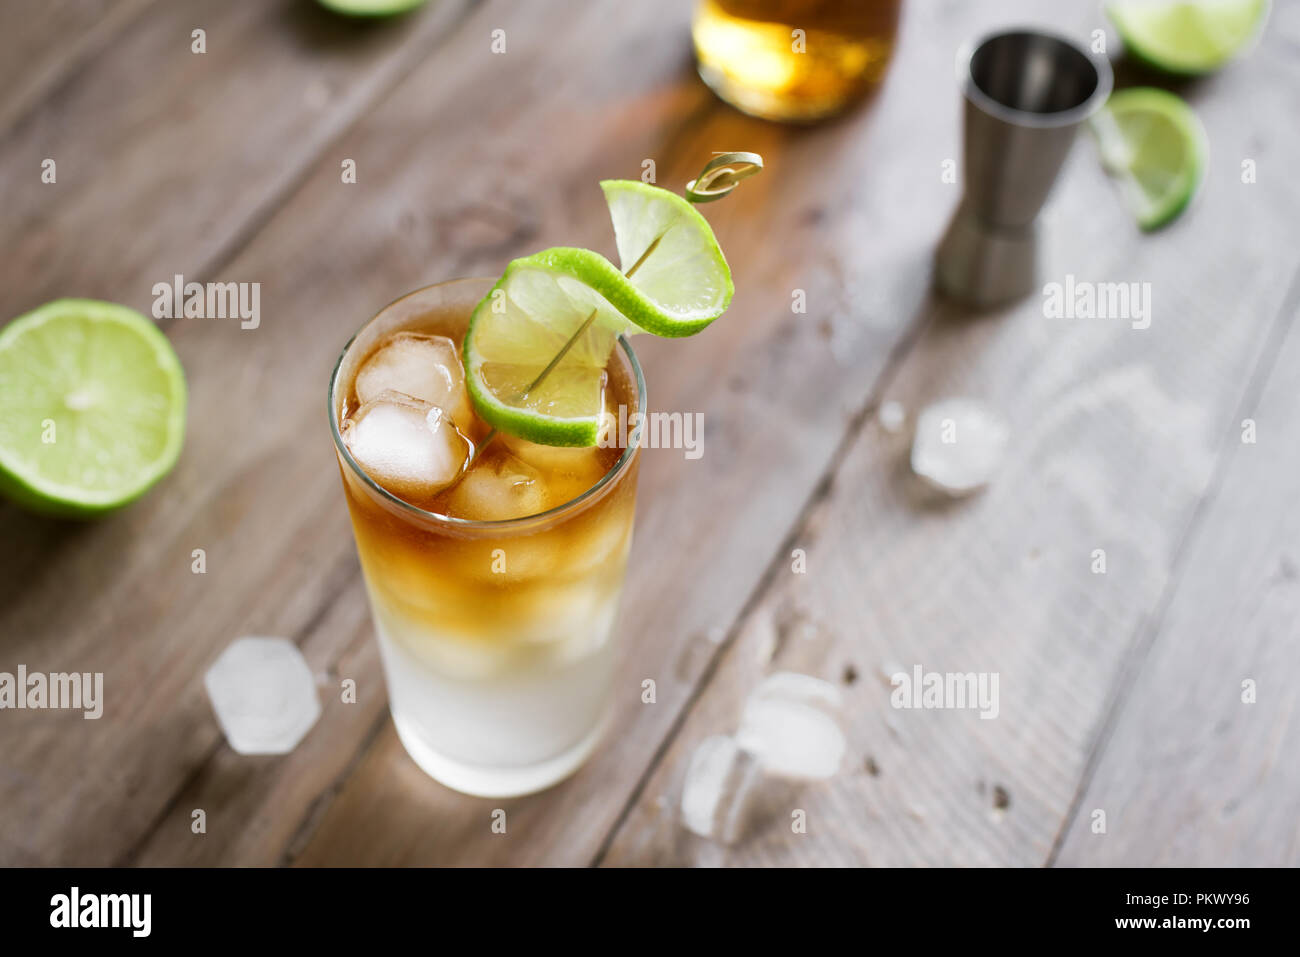 Dark and Stormy Rum Cocktail with Ginger Beer and Lime garnish. Glass of Dark and Stormy Cocktail drink on wooden table, copy space. Stock Photo